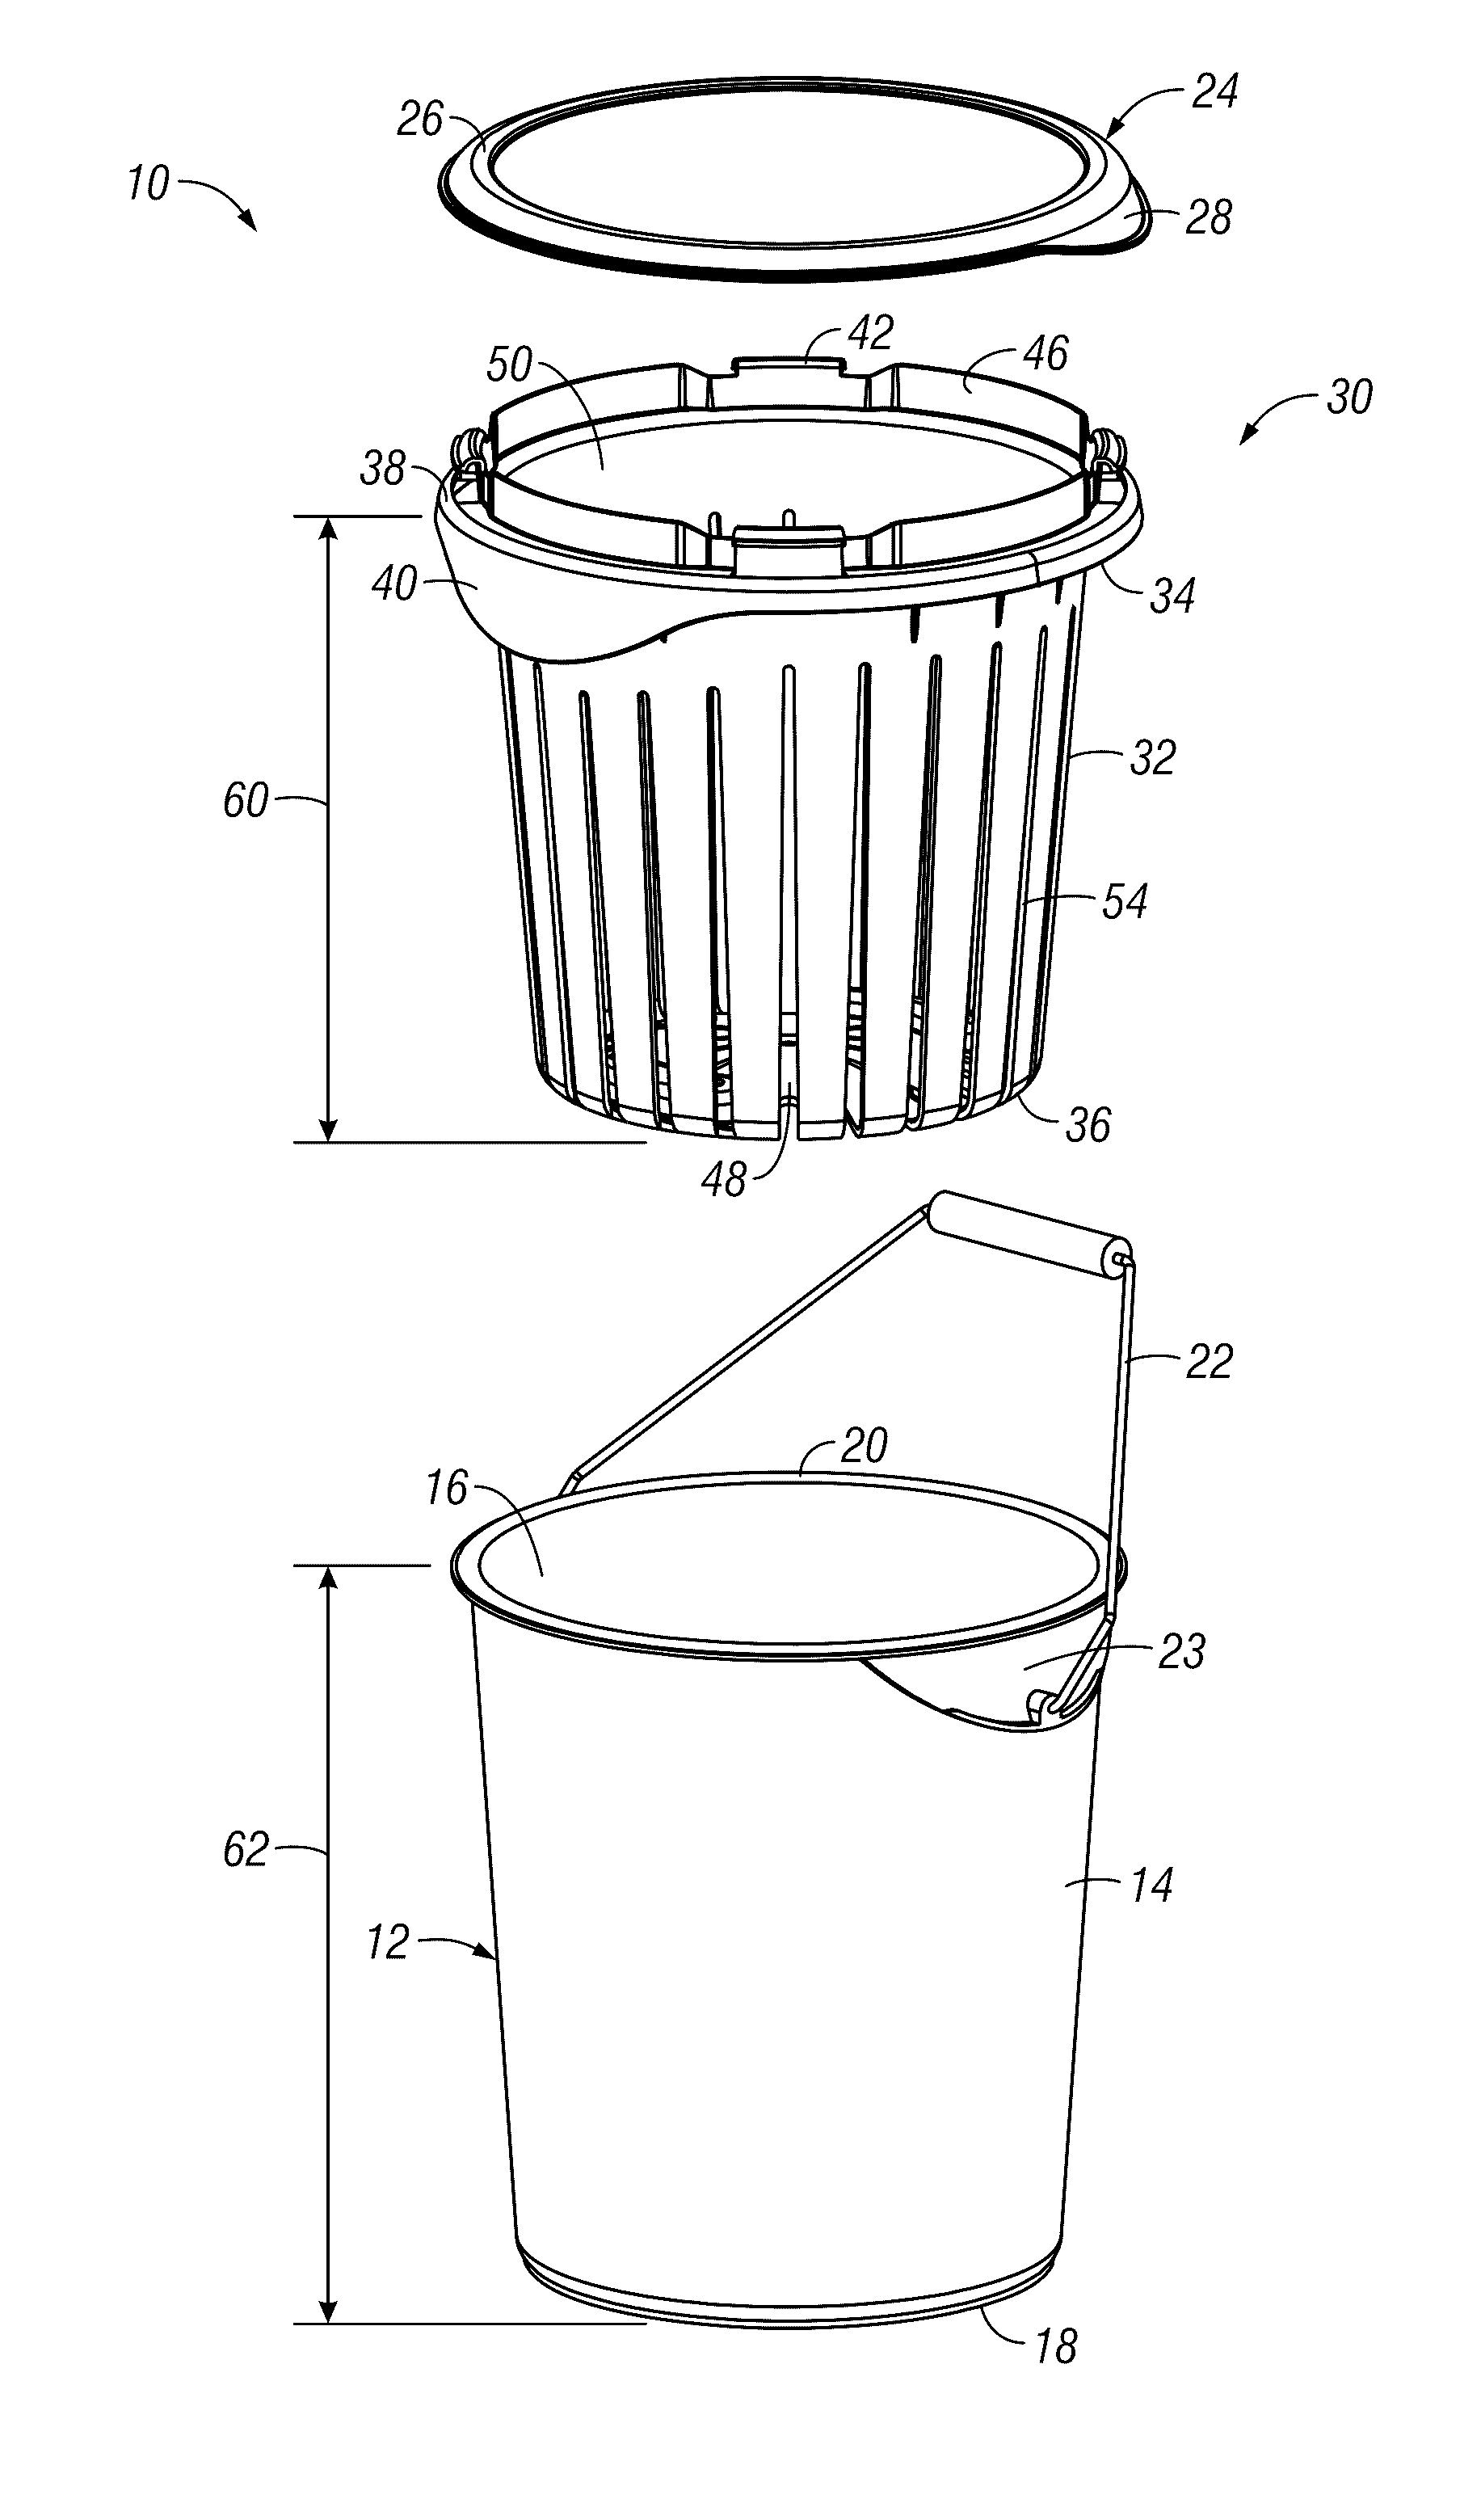 Slotted basket for the soaking and straining of towels, cloths, and other hard surface items